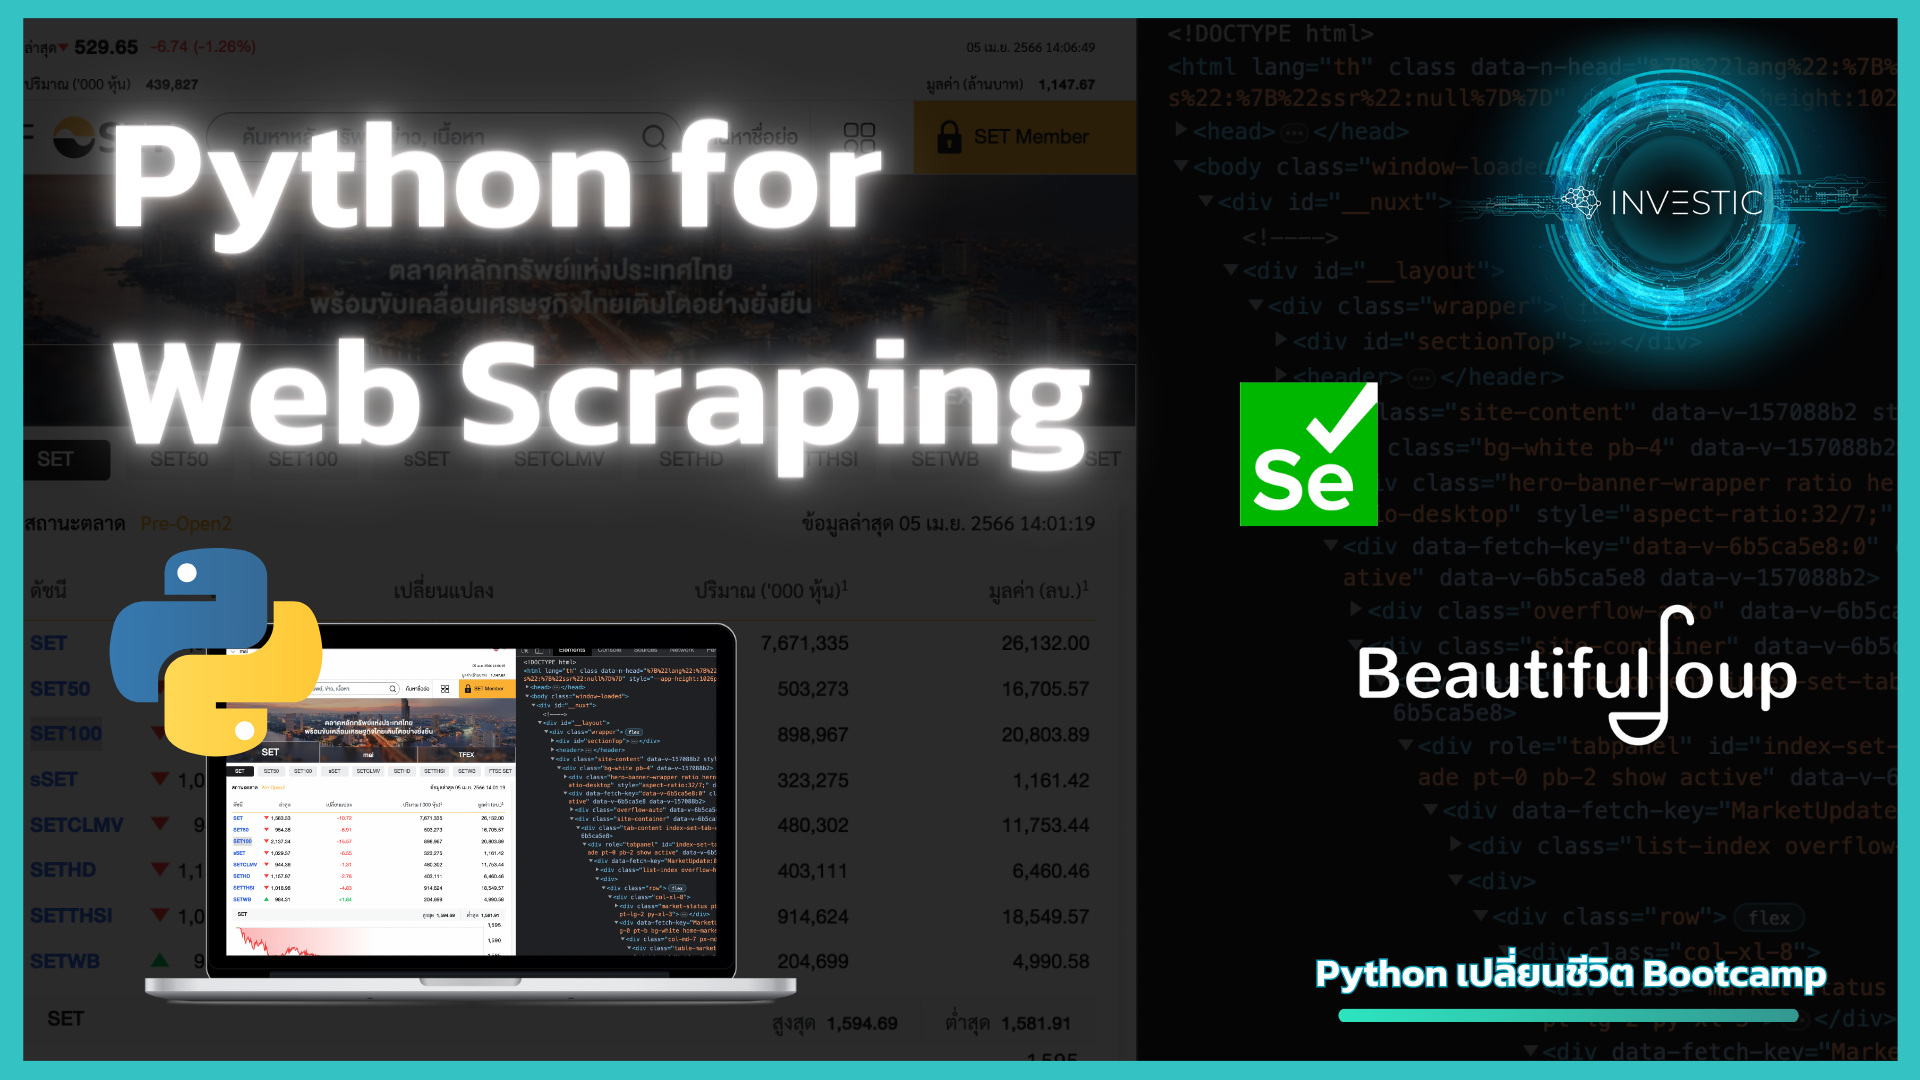 Python for Web Scraping